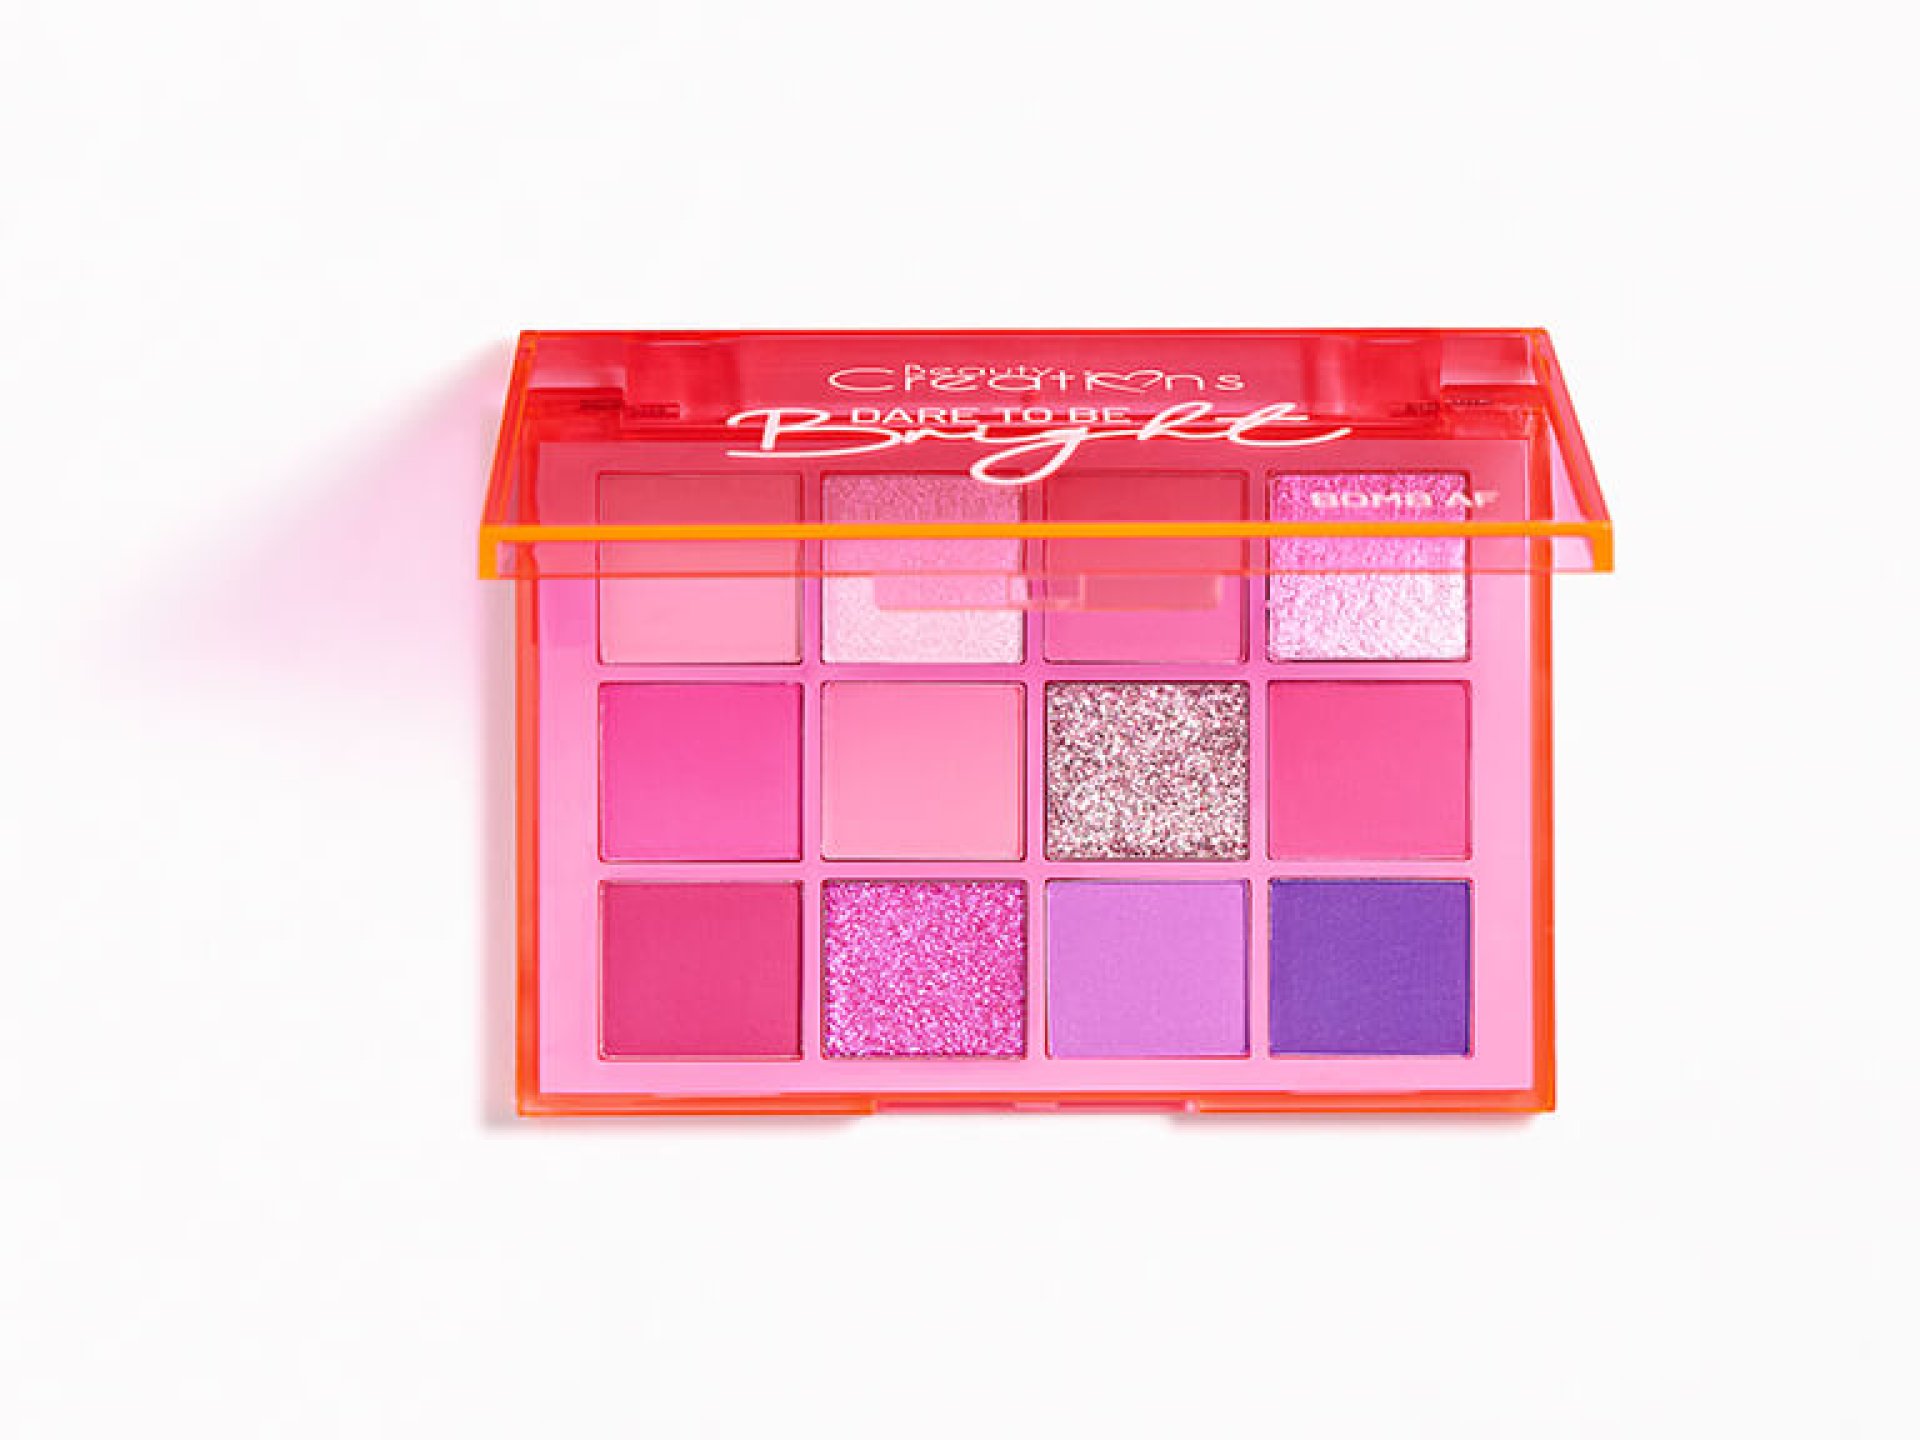 BEAUTY CREATIONS COSMETICS Dare To Be Bright Bomb AF Eyeshadow Palette